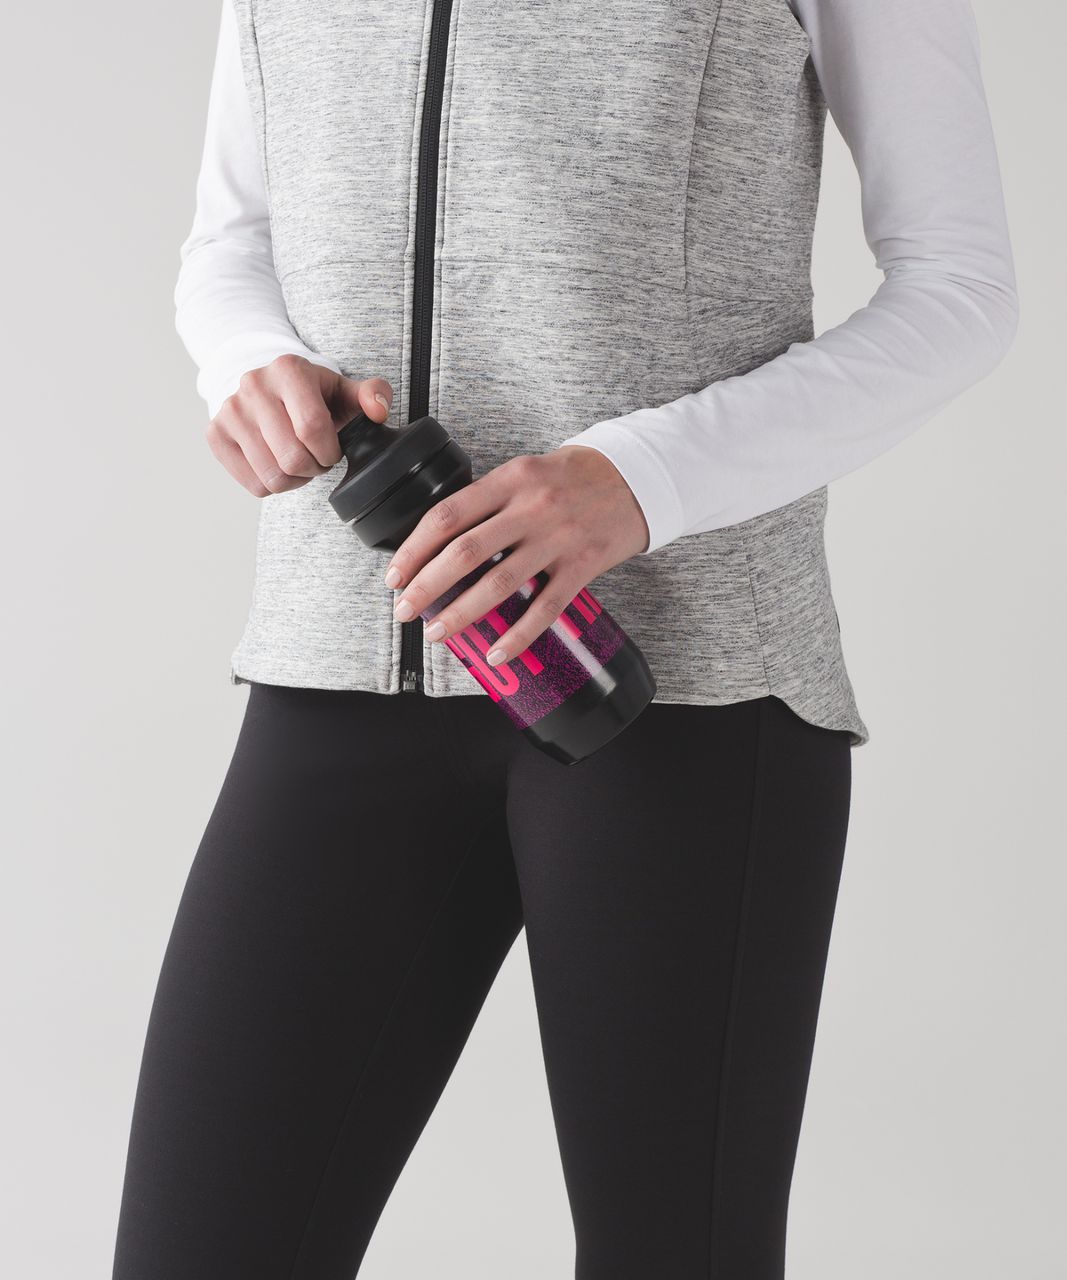 Lululemon Mini Purist Cycling Waterbottle - Purist You Got This Pow Pink